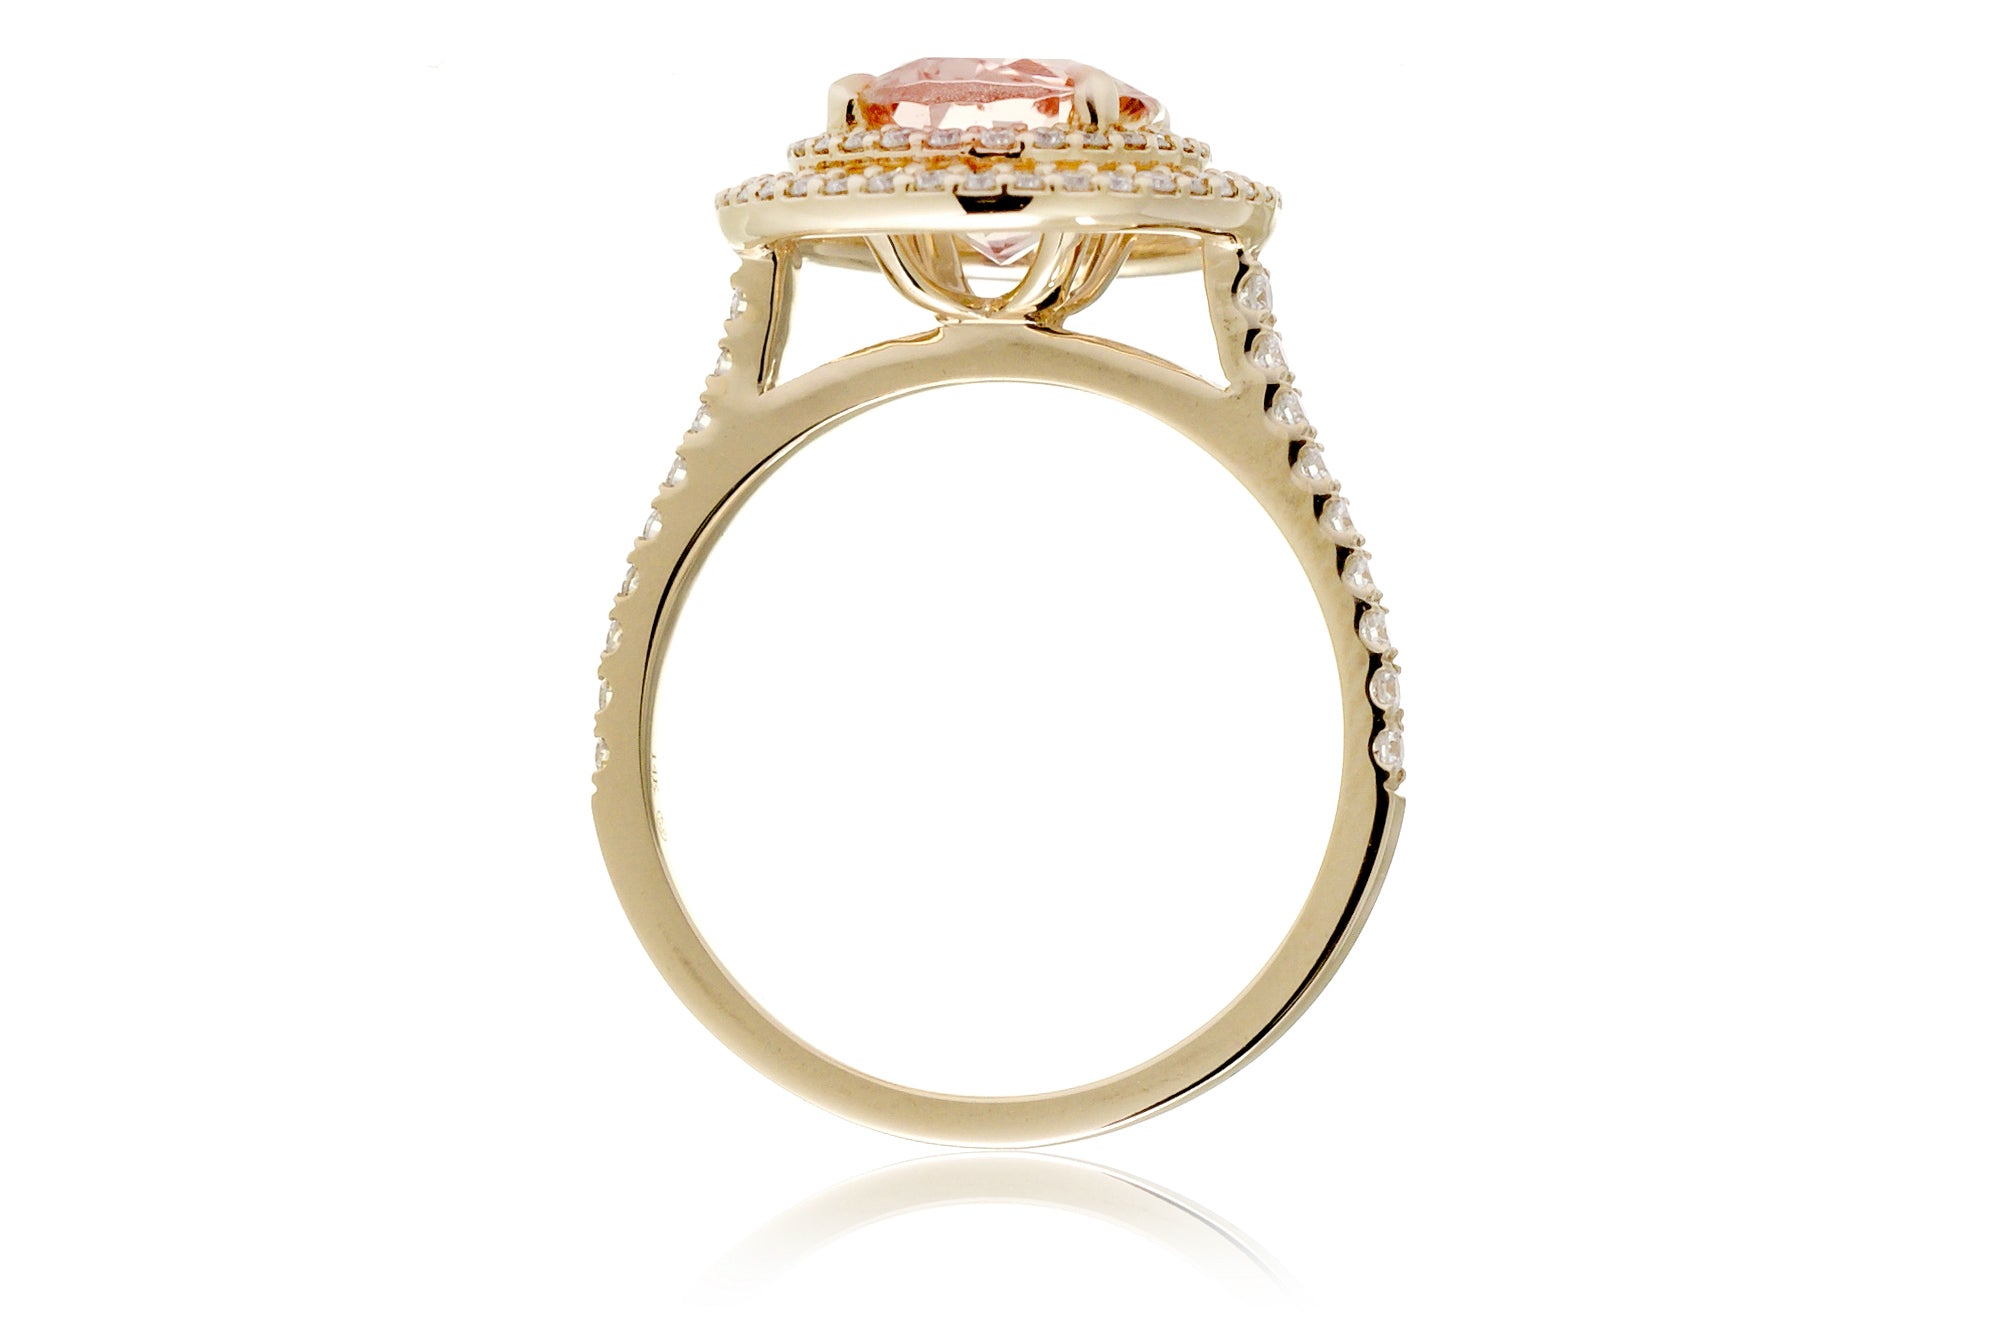 The Steffy Double Halo Oval Morganite